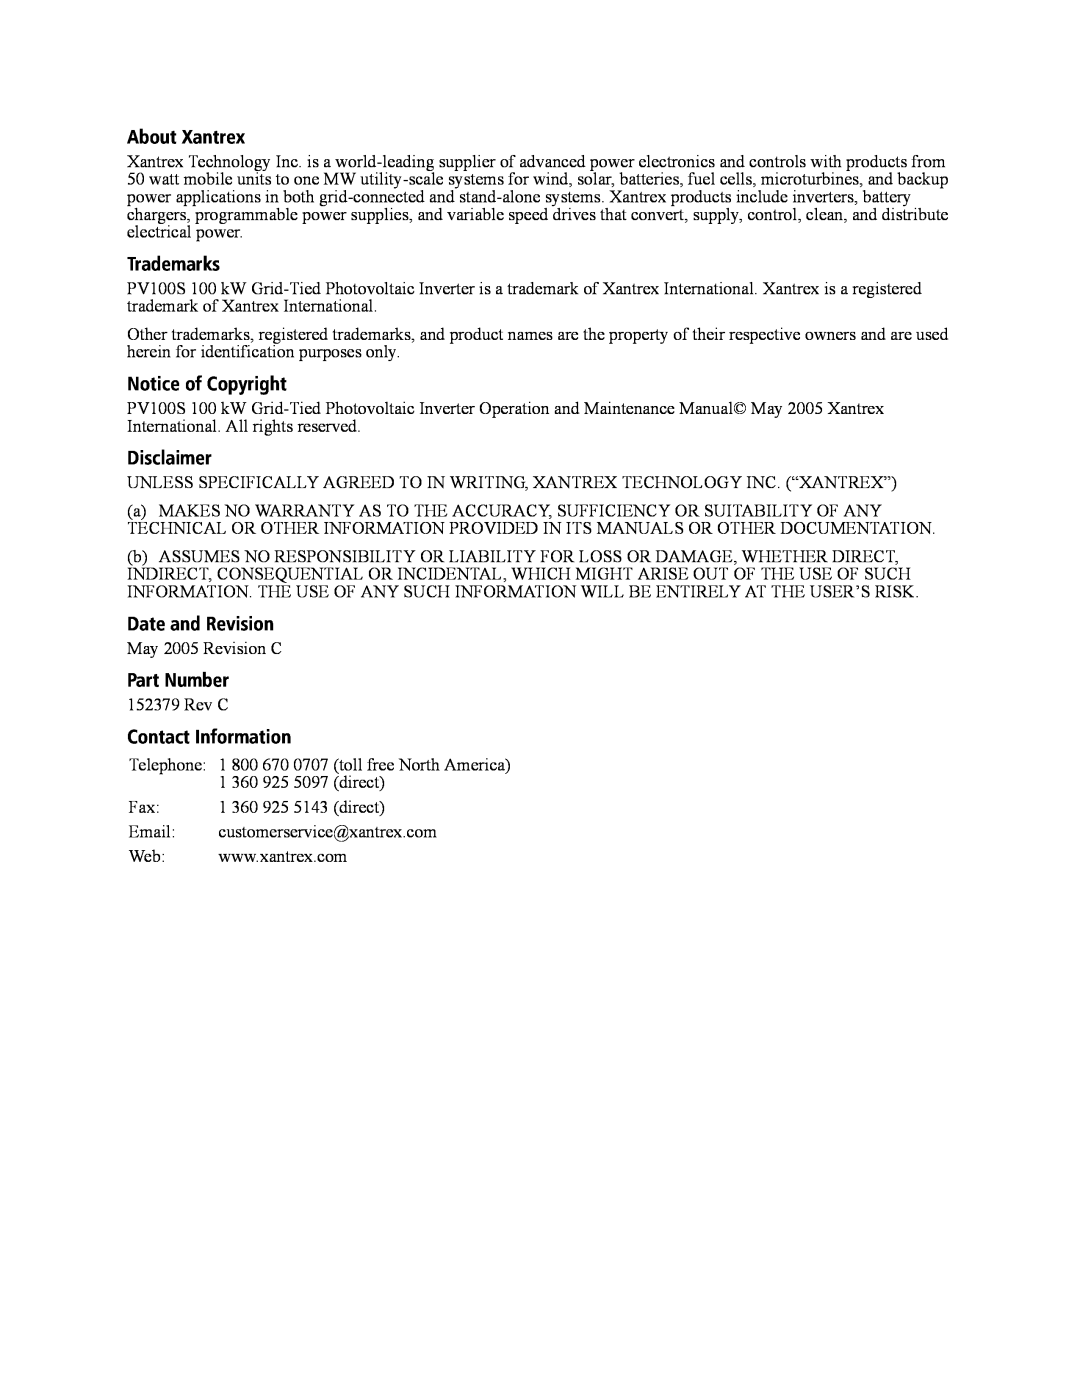 Xantrex Technology PV100S-208 About Xantrex, Trademarks, Notice of Copyright, Disclaimer, Date and Revision, Part Number 